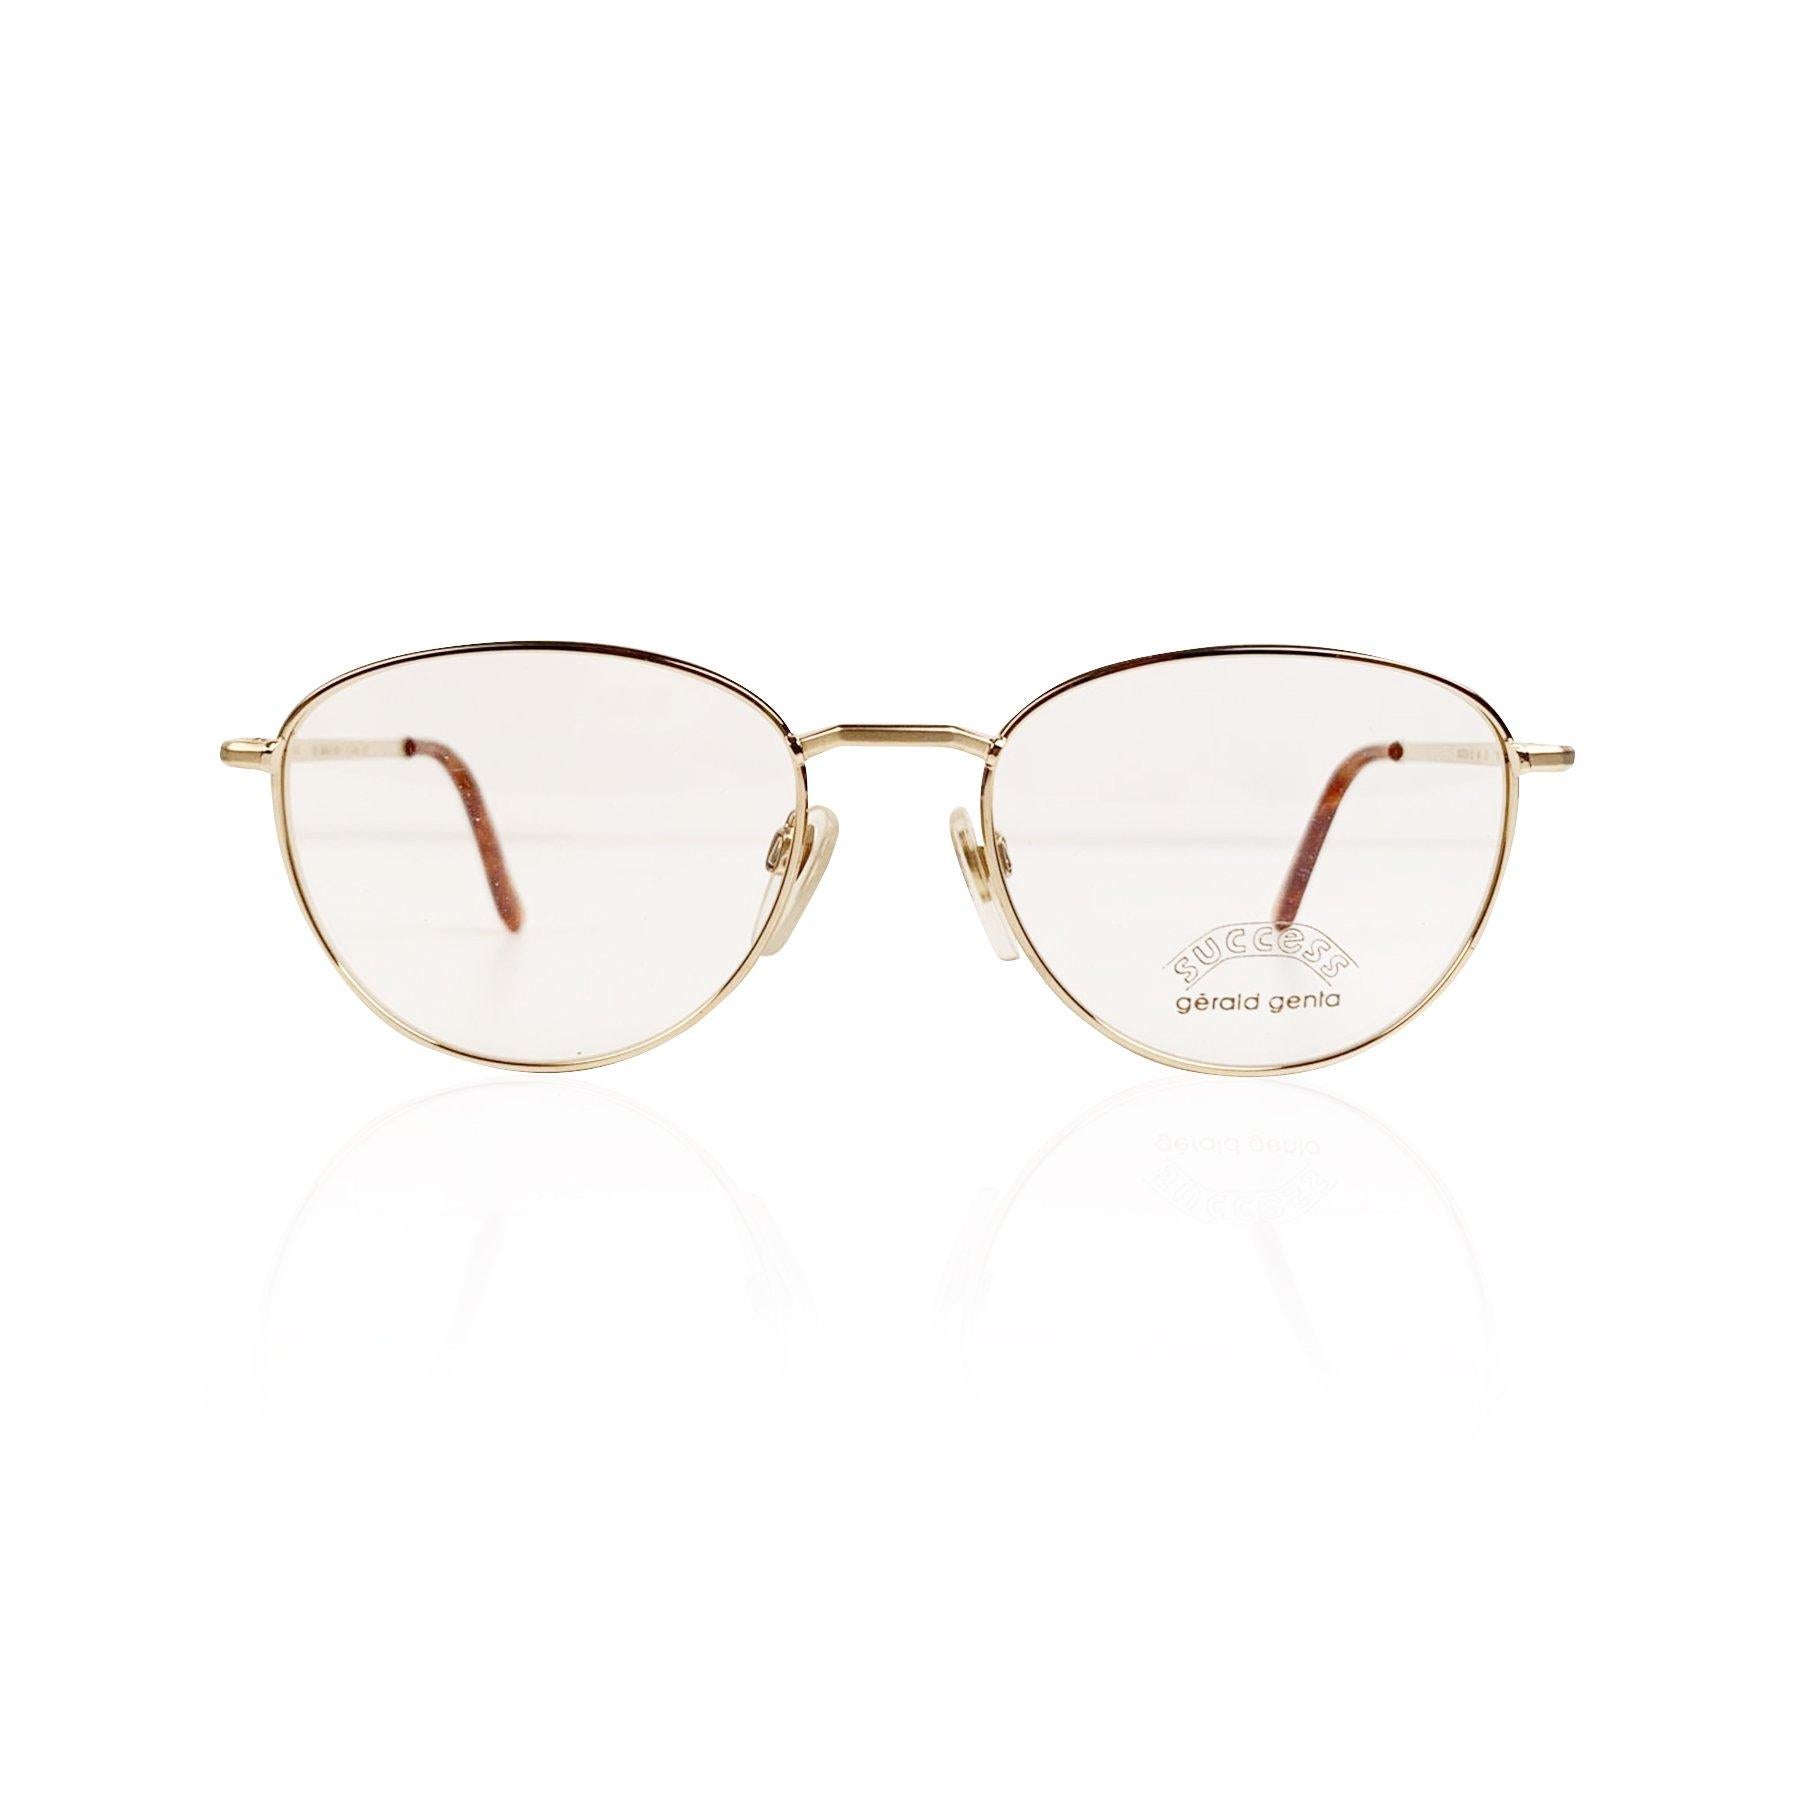 Gold plated'eyeglasses by Gerald Genta by Orama, from the early 1990s. Model: Success 02 - OR - 135 - 9301932 - CE93. Beautiful gold frame. Hand Made in Italy. Details MATERIAL: Gold Plated COLOR: Gold MODEL: Success 02 GENDER: Adult Unisex SIZE: